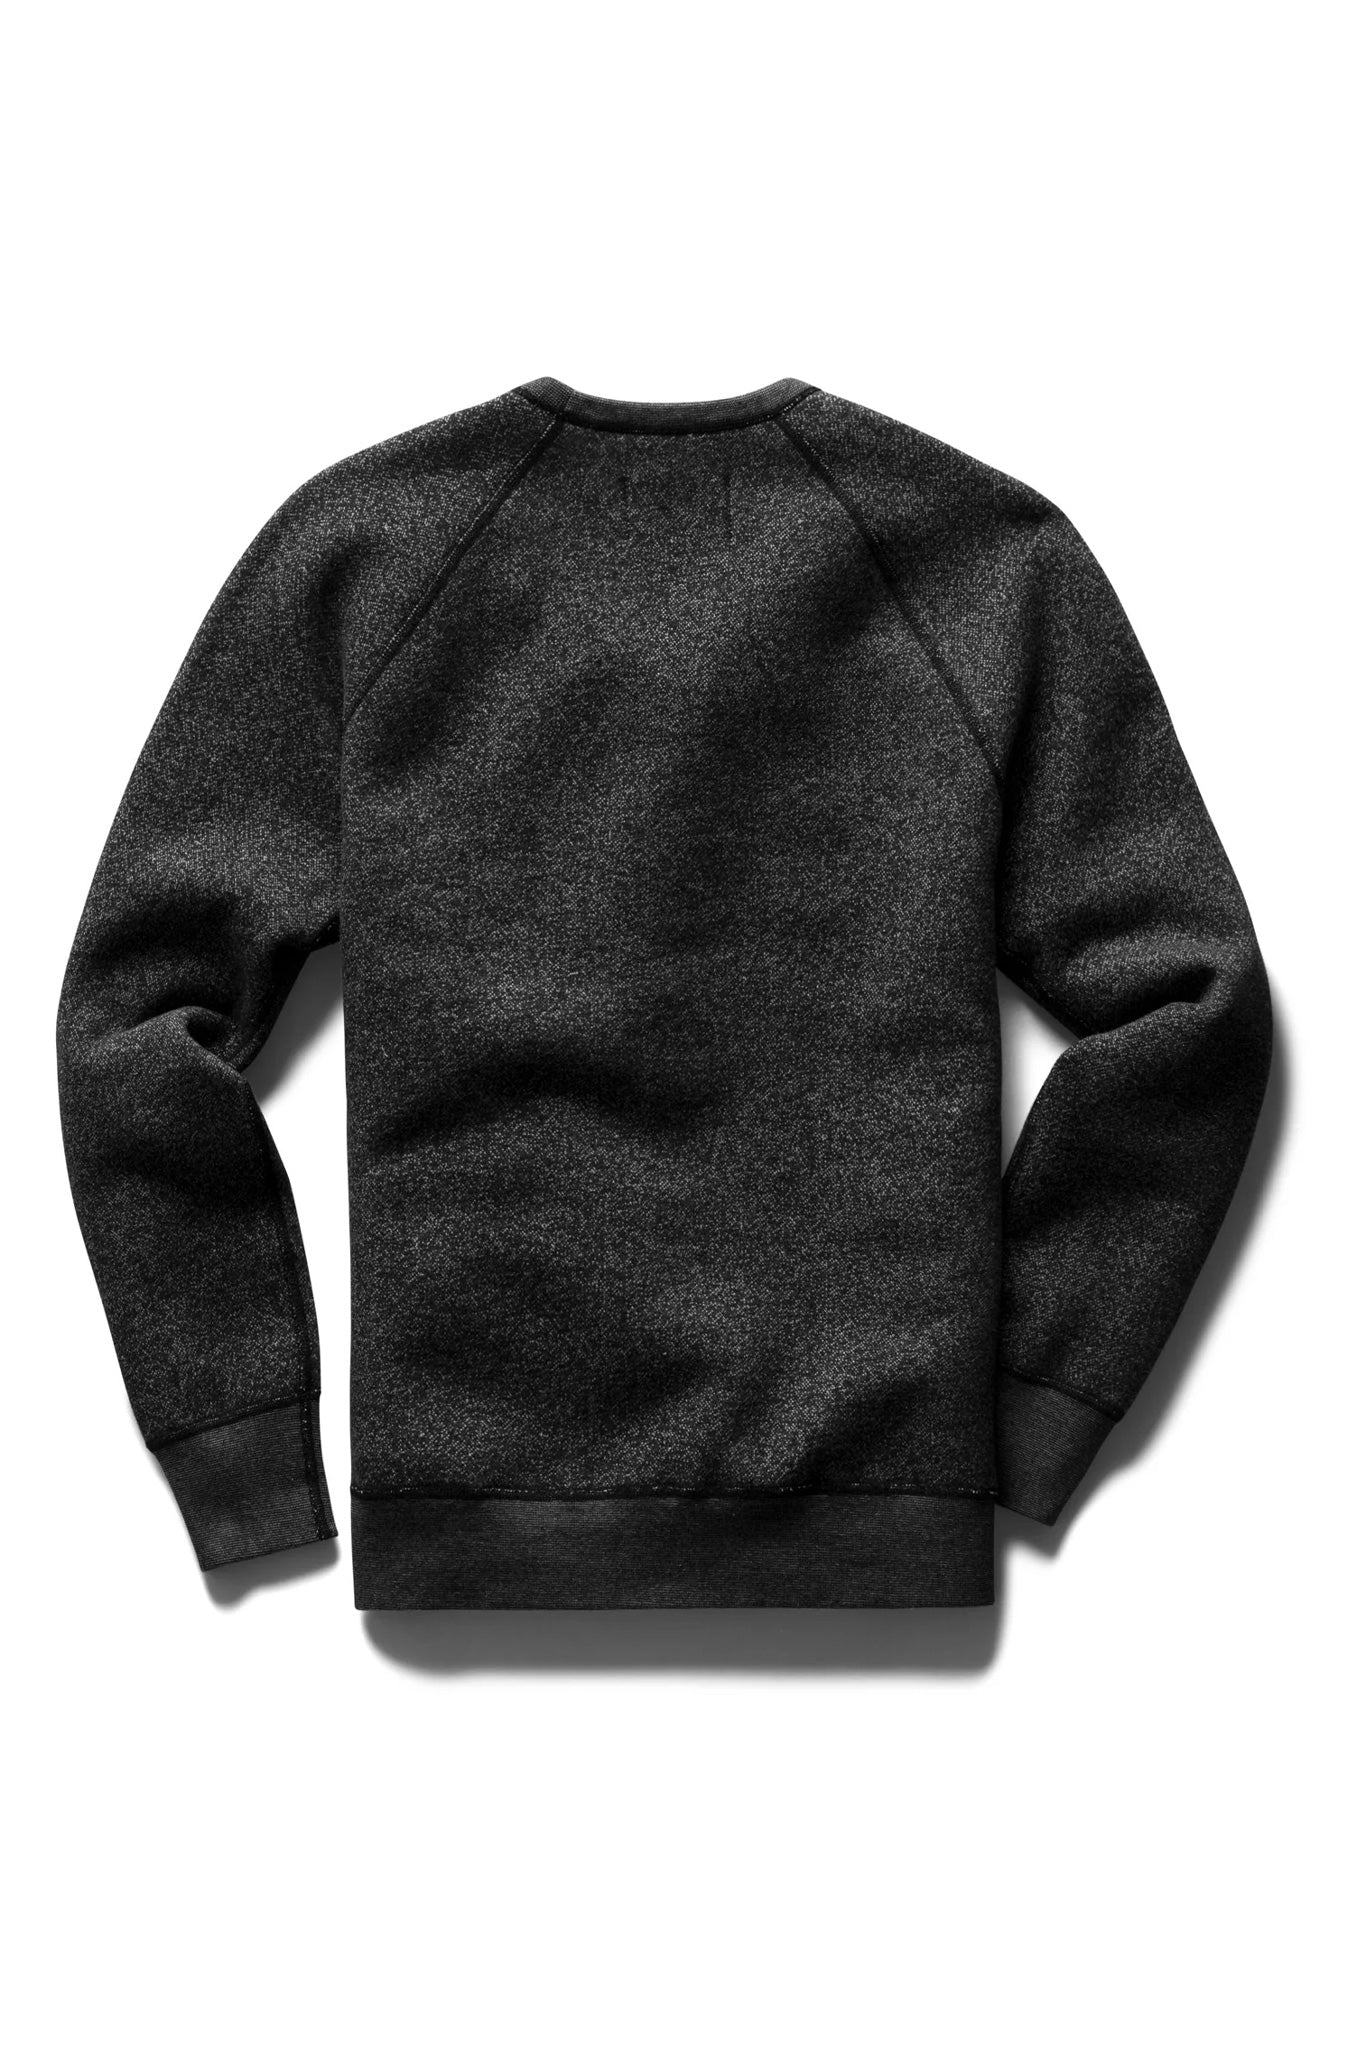 Tiger Fleece Crewneck Sweaters &amp; Knits Reigning Champ   